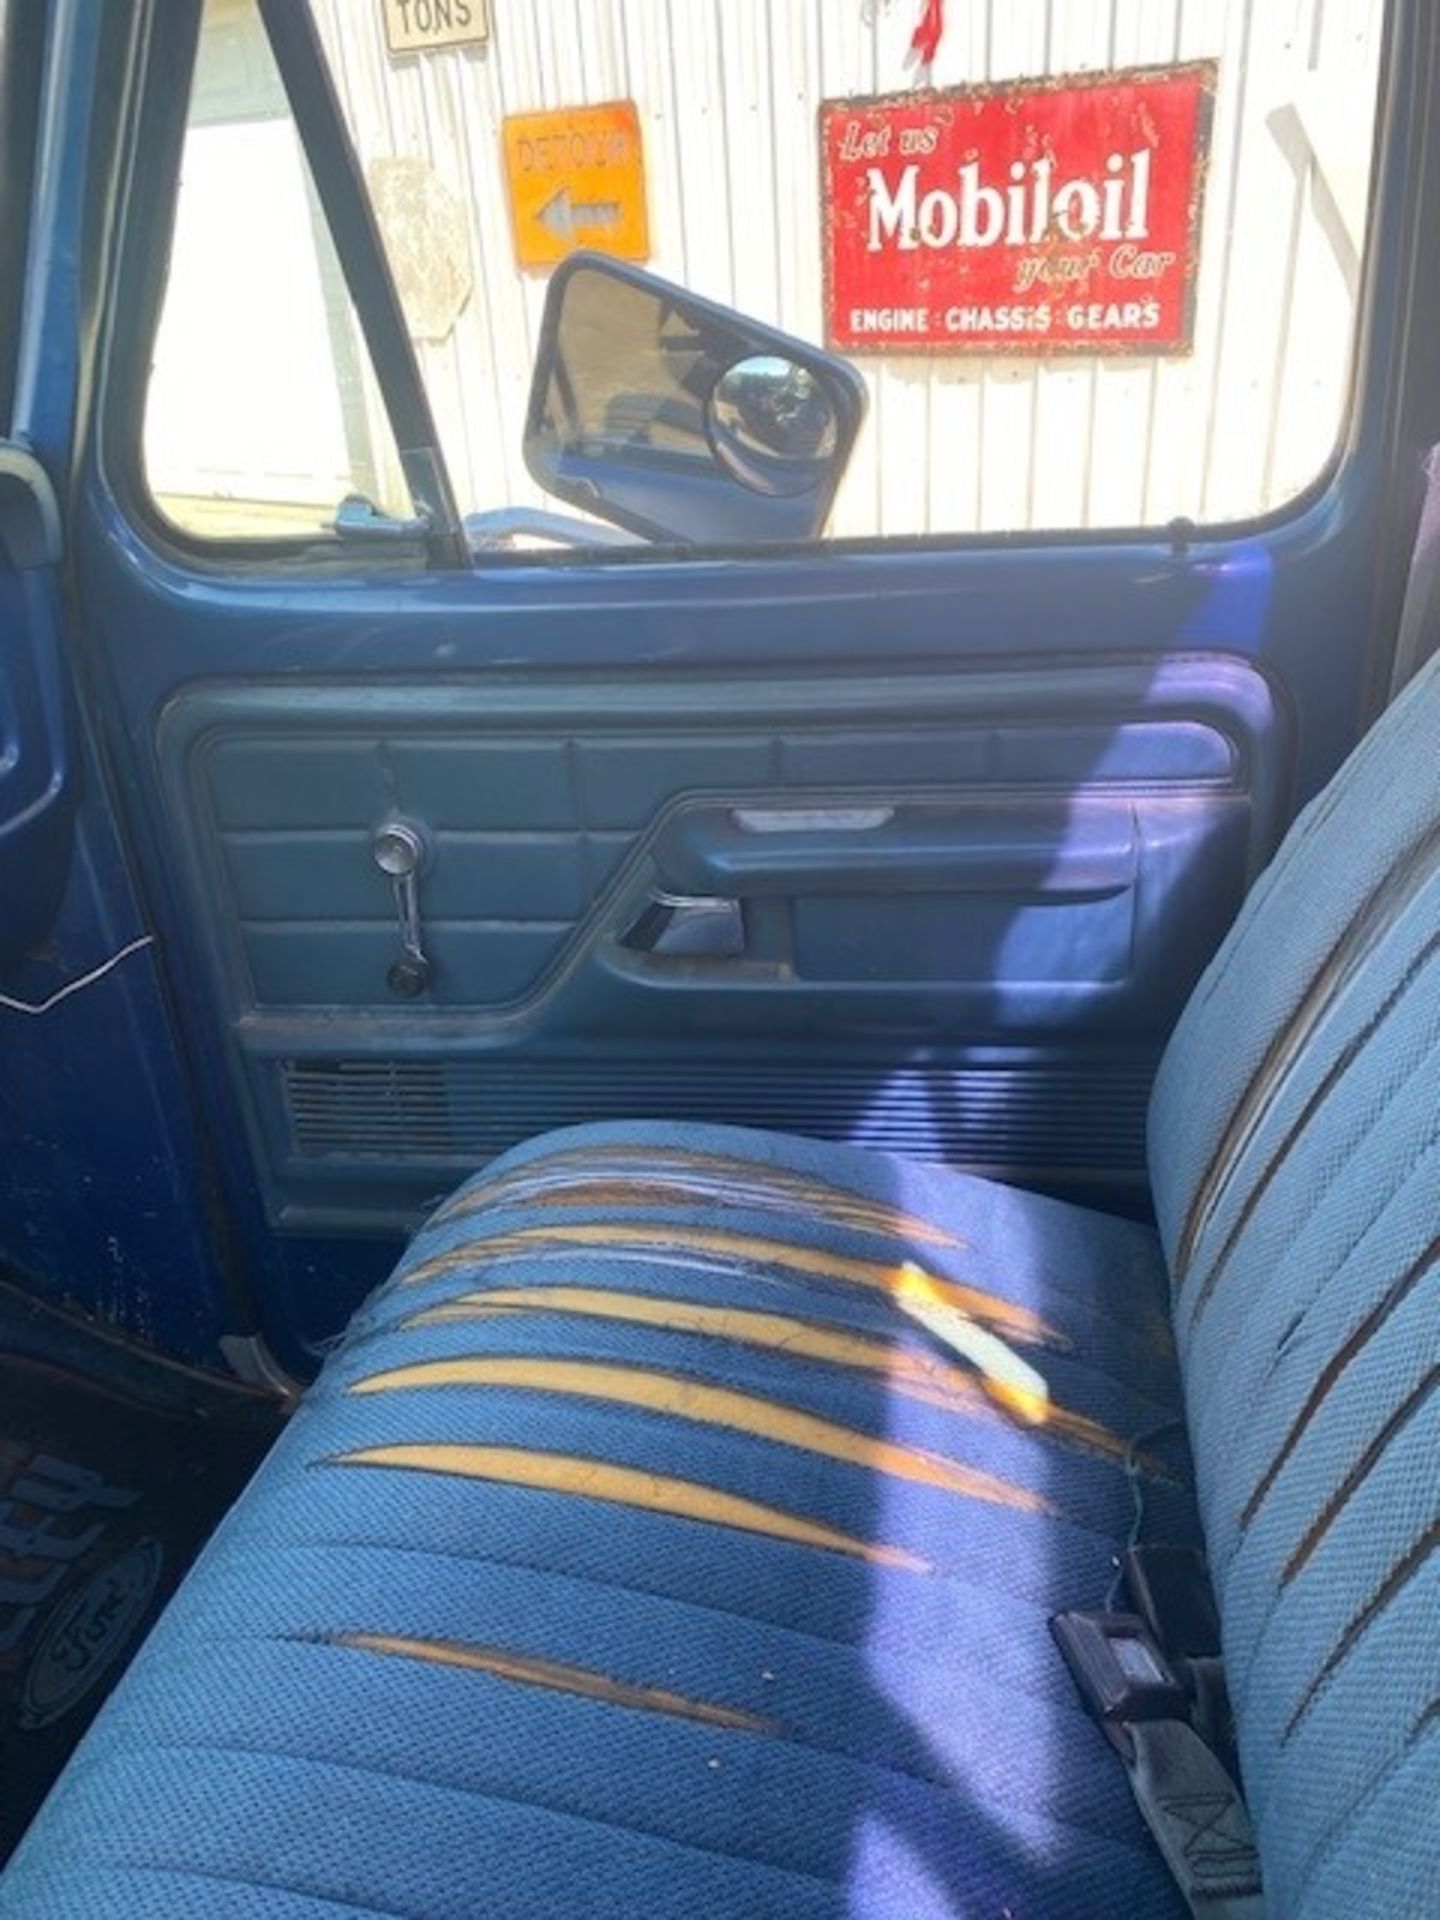 1977 Ford F150 Pickup - Image 15 of 20